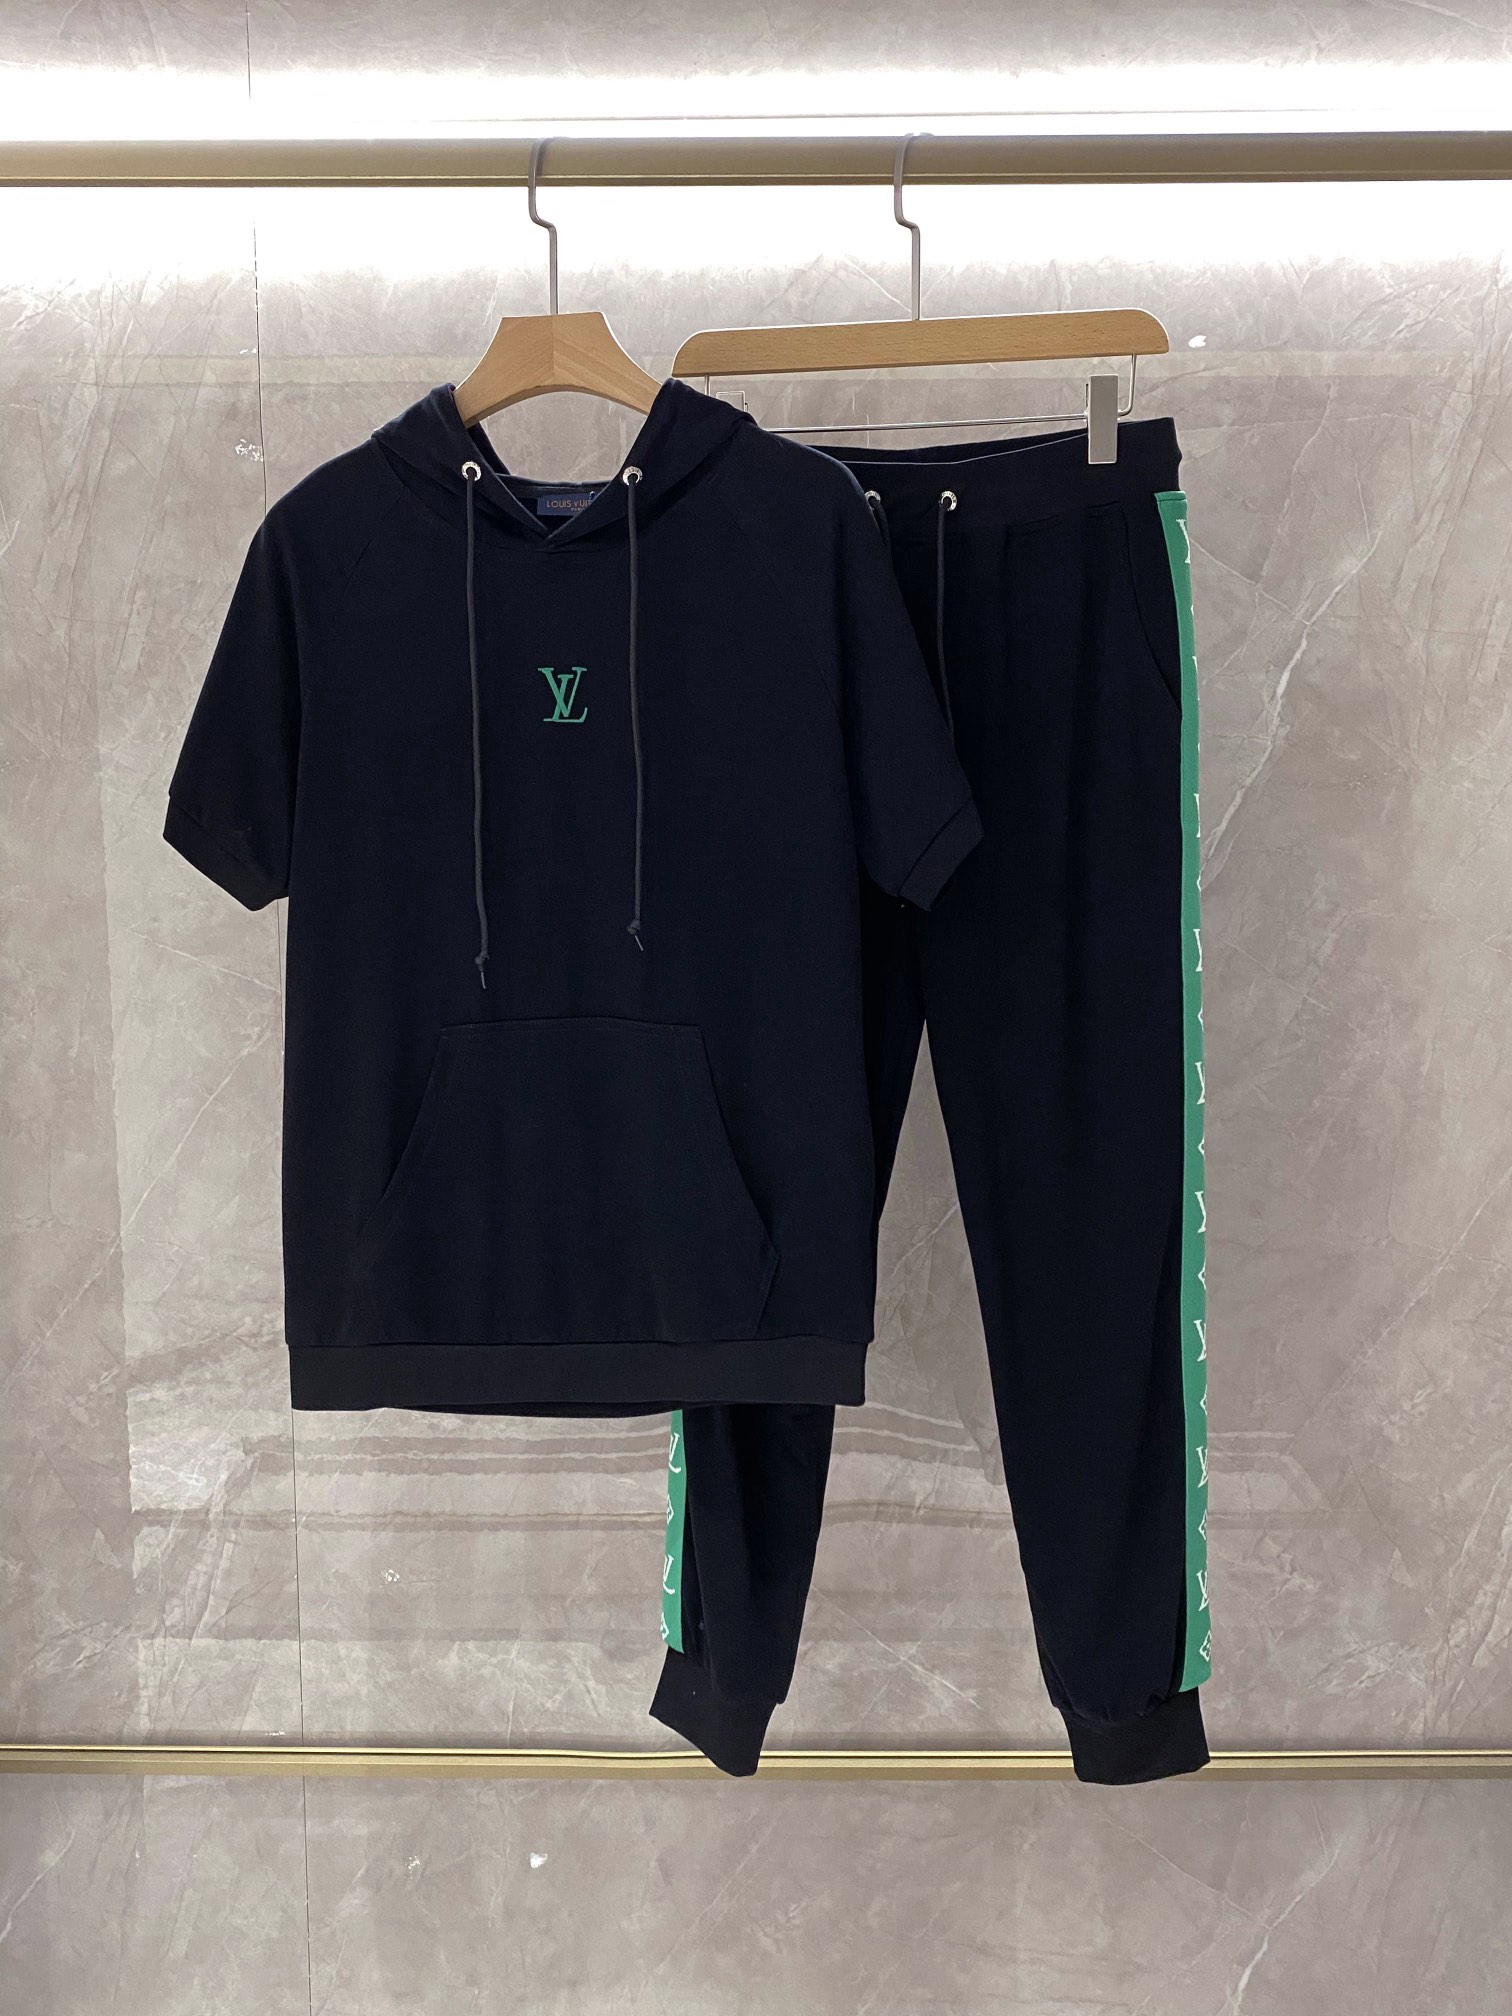 Louis Vuitton New
 Clothing Pants & Trousers T-Shirt Two Piece Outfits & Matching Sets Cotton Mercerized Spring/Summer Collection Hooded Top